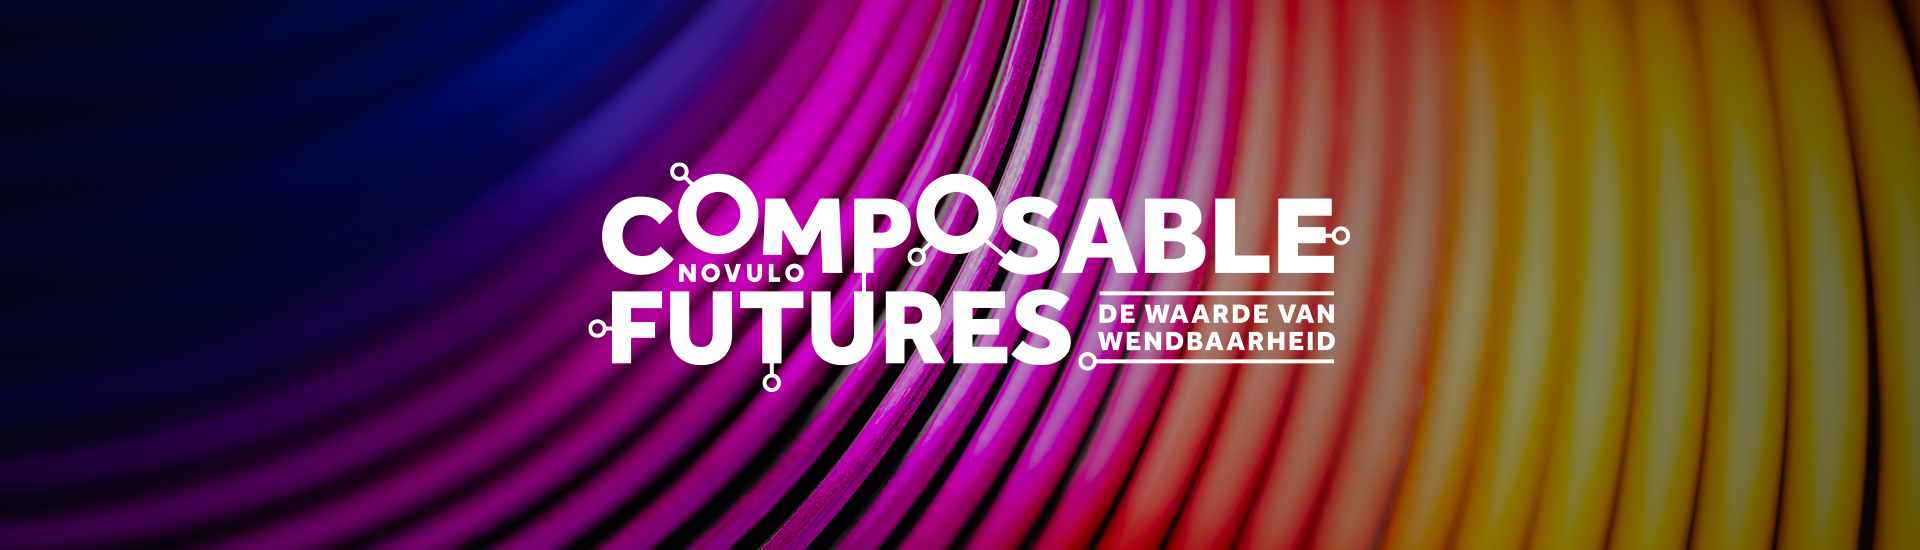 Novulo composable futures event save the date